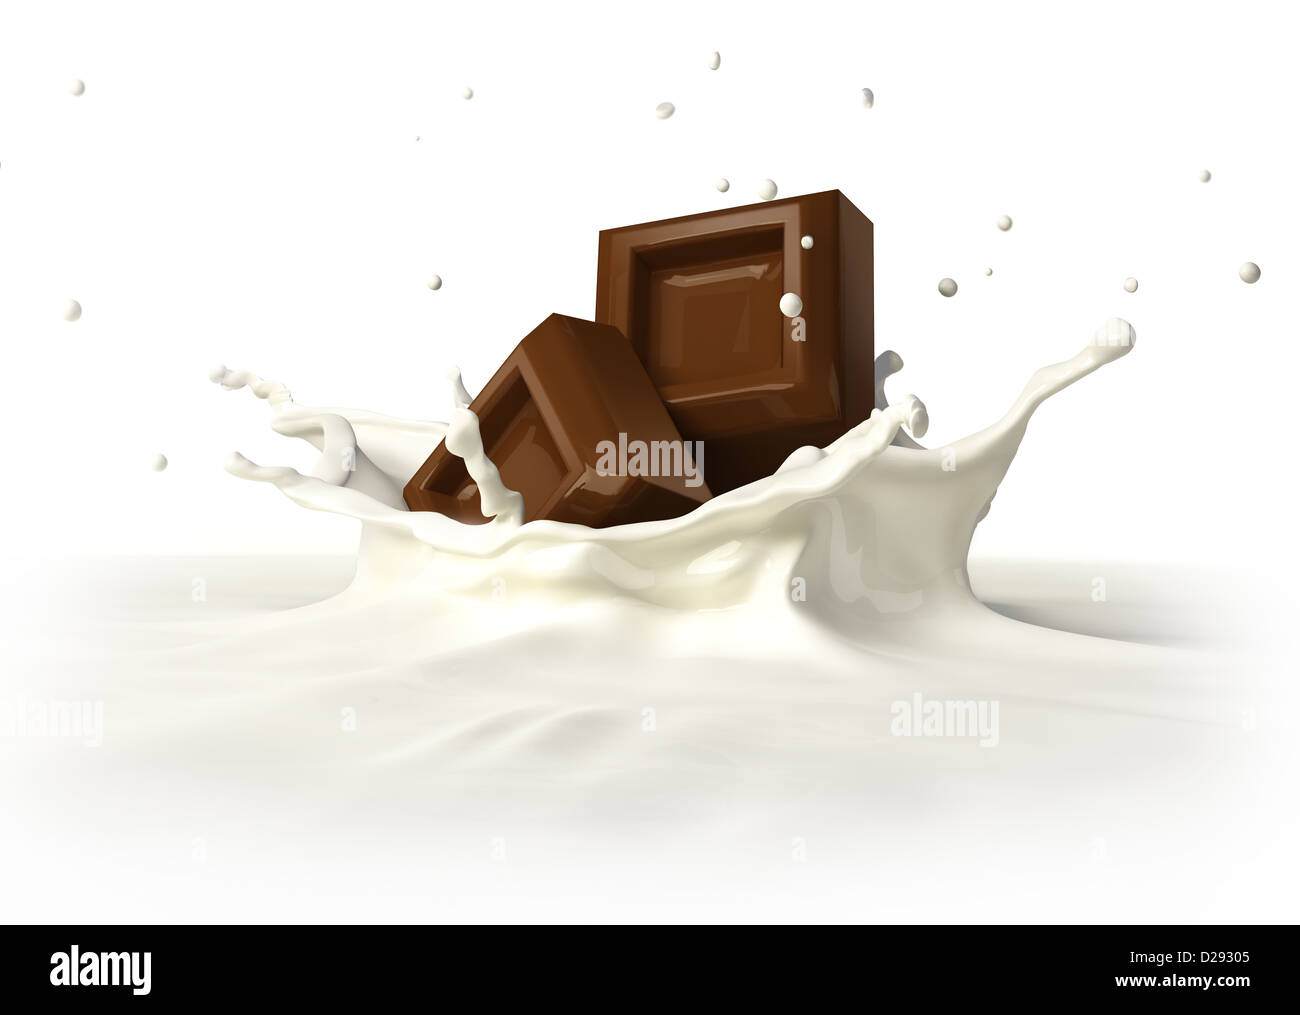 Two chocolate blocks falling into milk forming a crown splash. On white background, with clipping path included. Stock Photo